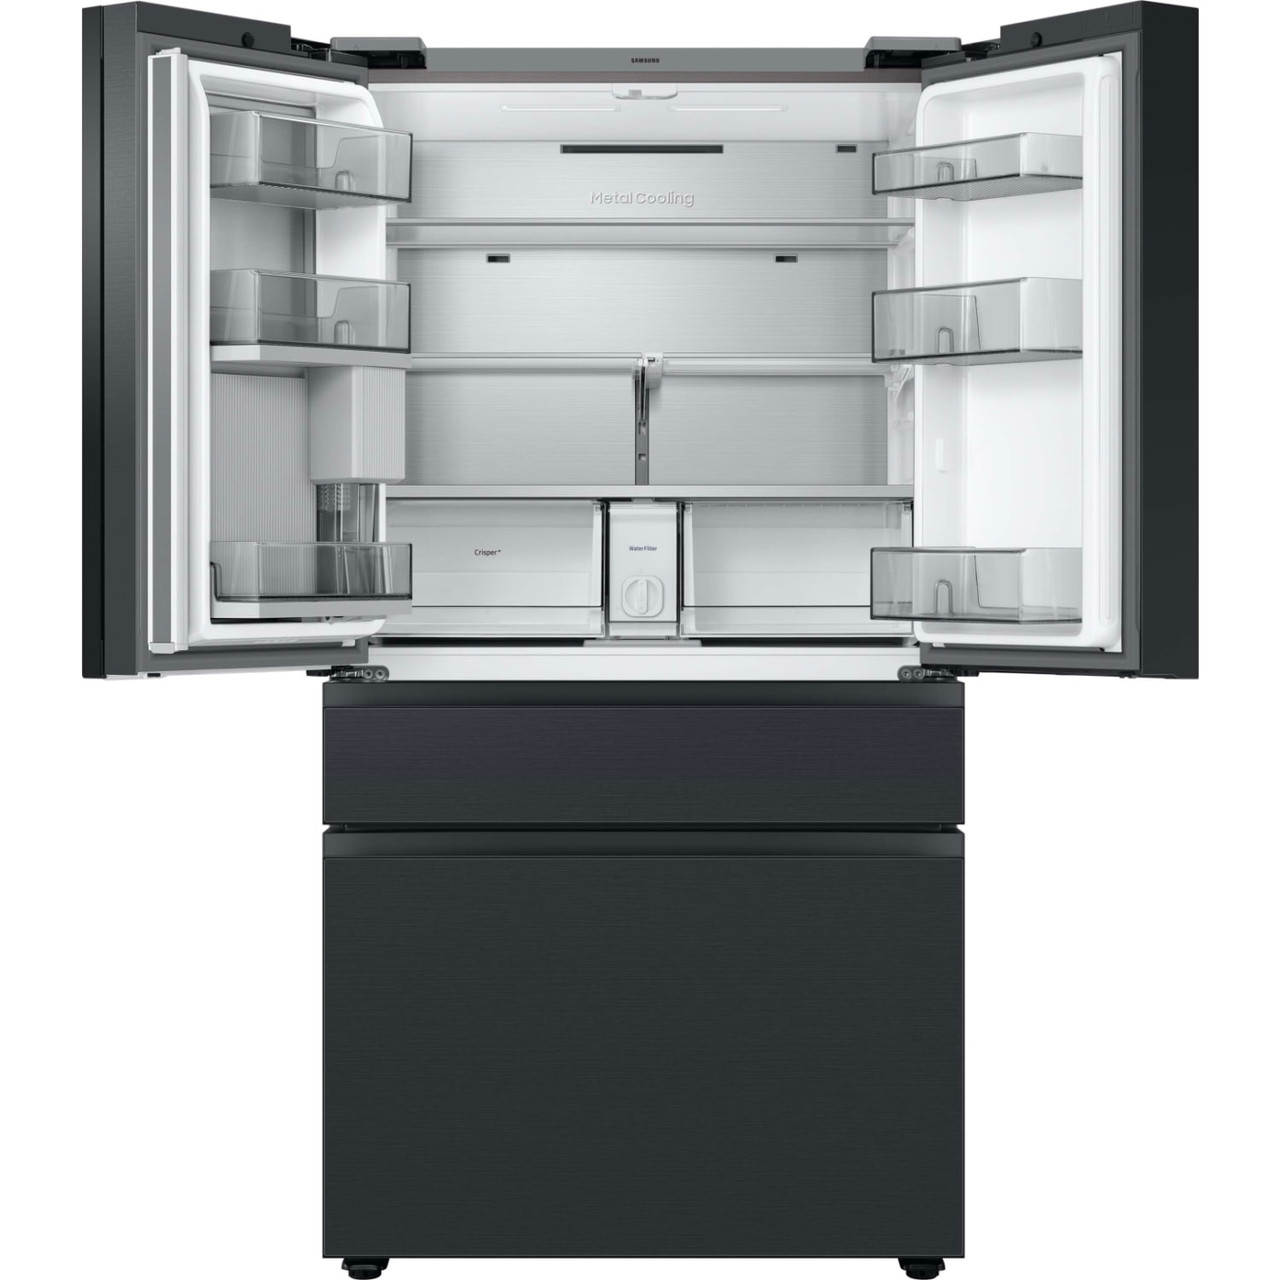 Samsung BESPOKE 23 cu. ft. Smart 4-Door French-Door Refrigerator, Family Hub and Top in Charcoal Glass, Middle and Bottom Panels in Matte Black Steel